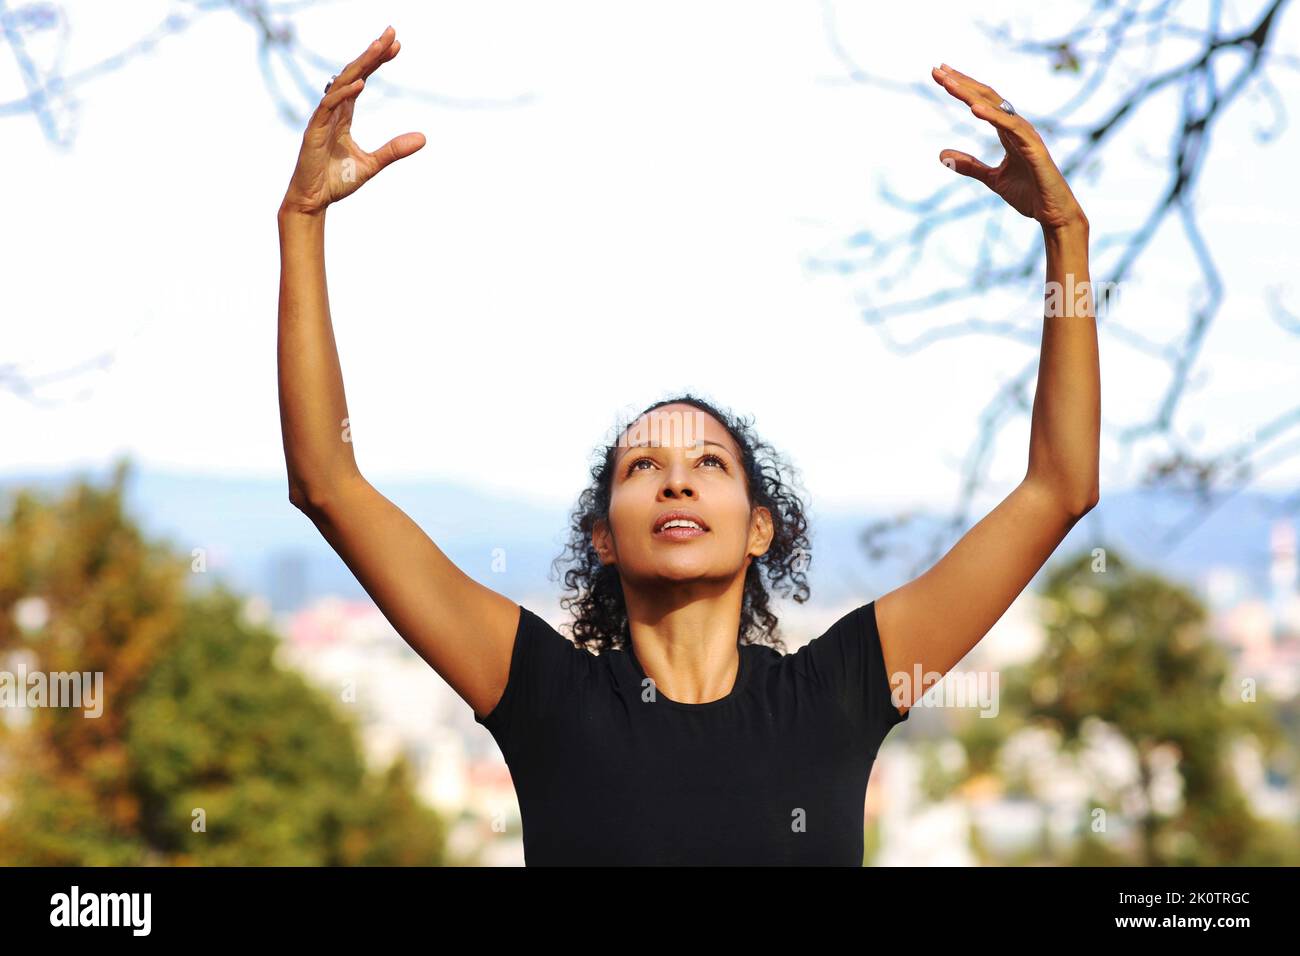 woman outdoors, arms raised curly hair sportswear Stock Photo